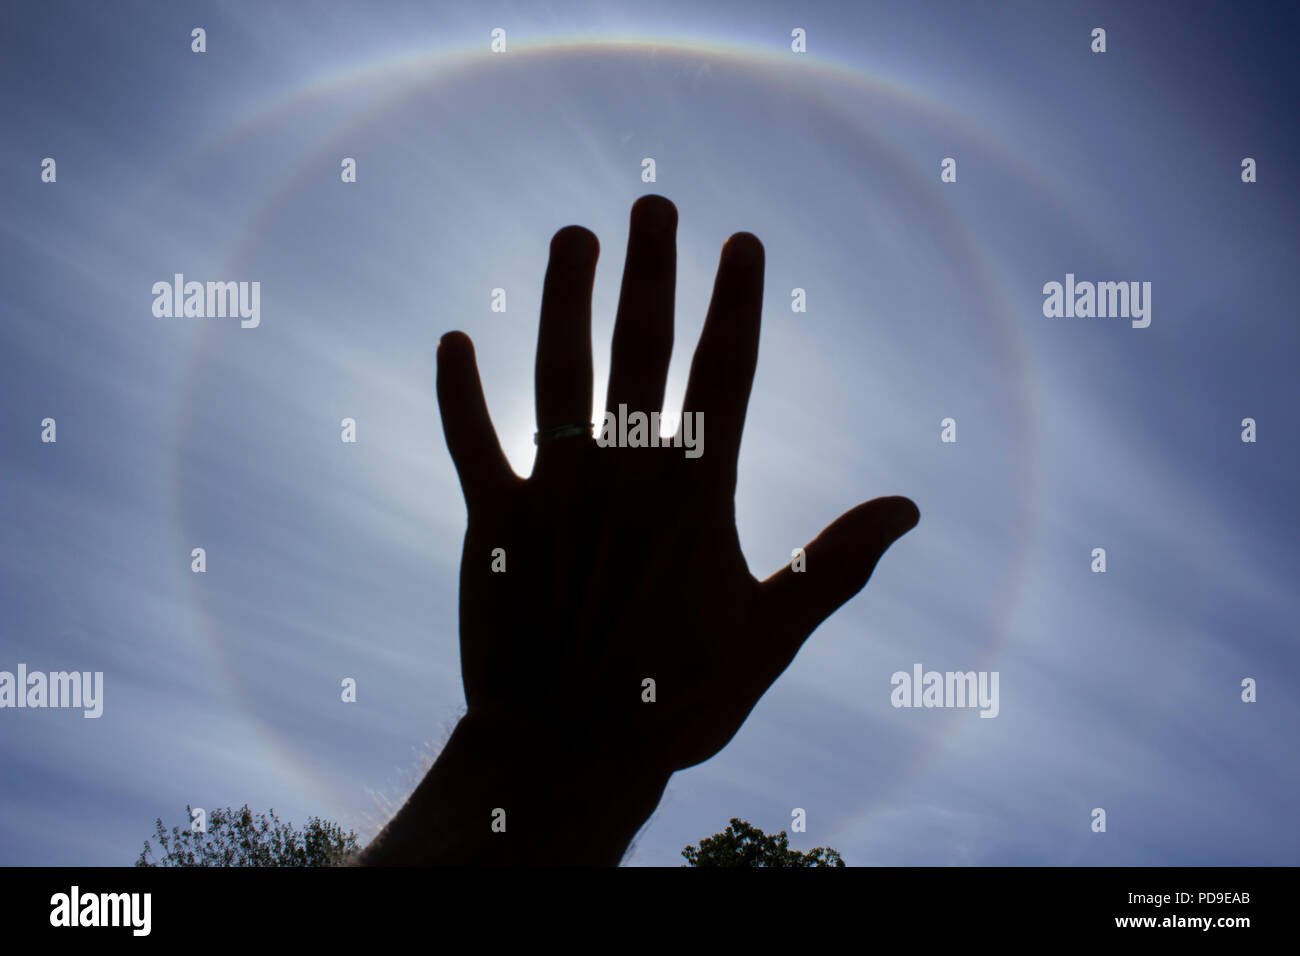 Stockholm, Sweden - August 6 2018: Circular rainbow around the sun which is blocked by the hand of a young male. Meteorological phenomenon. Stock Photo